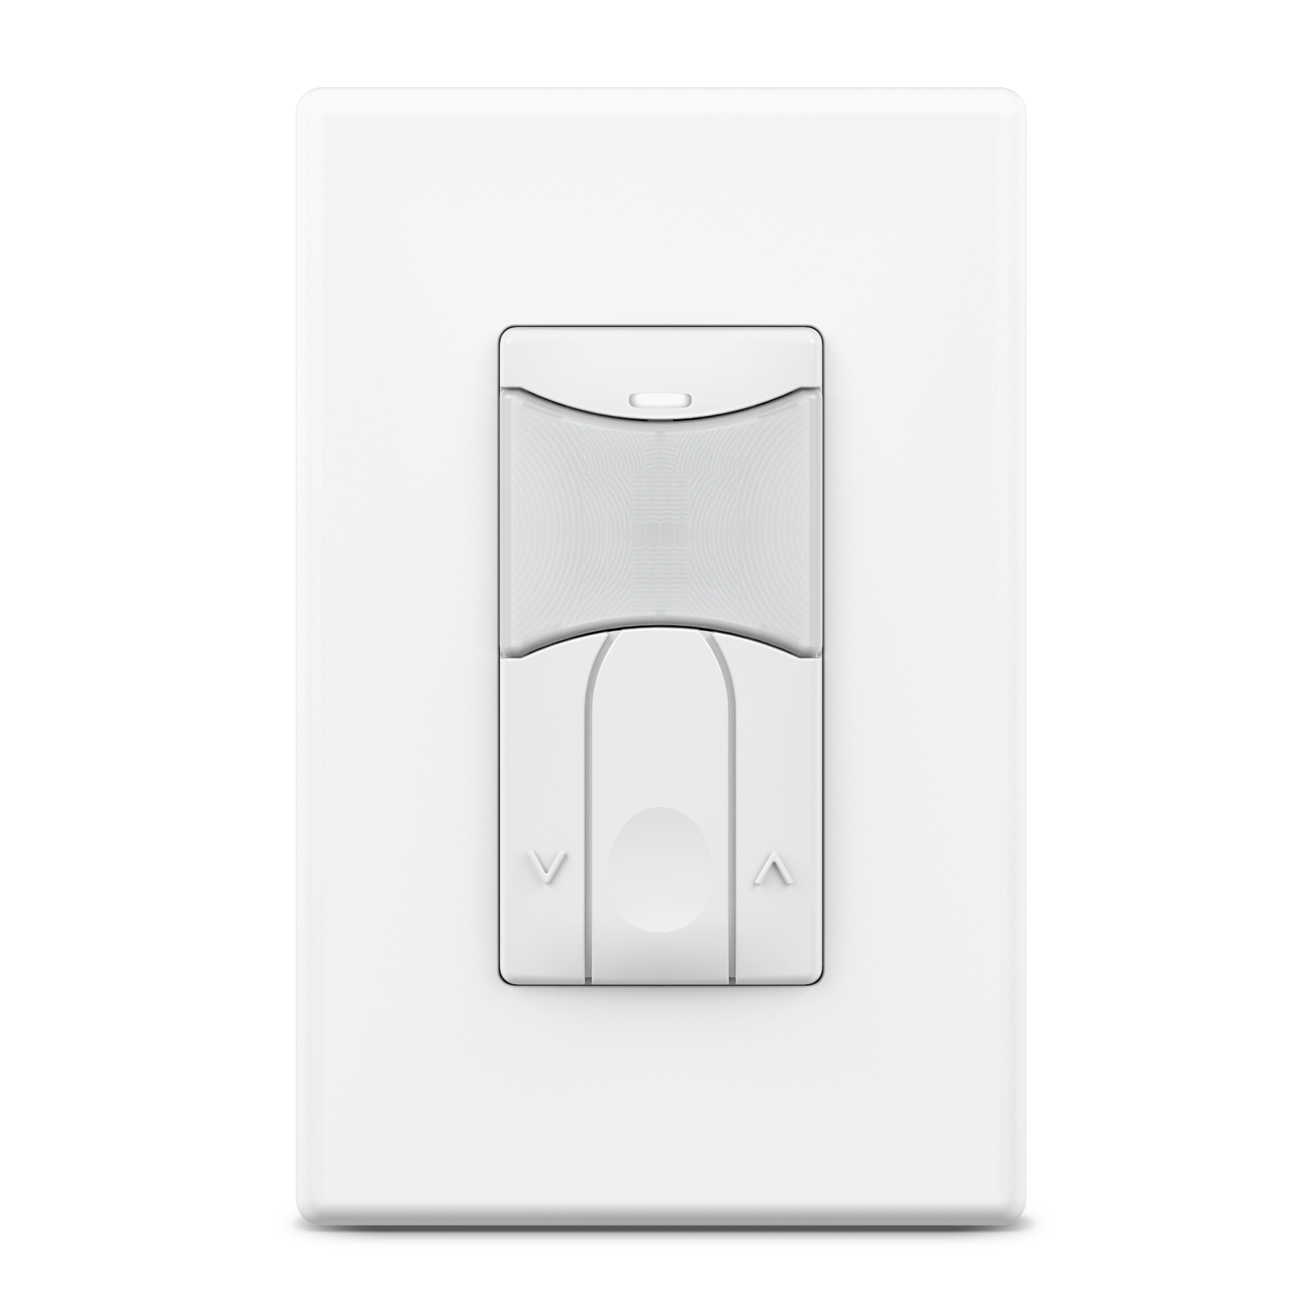 PS-SWX-100-D Dimming Wall Switch Sensors